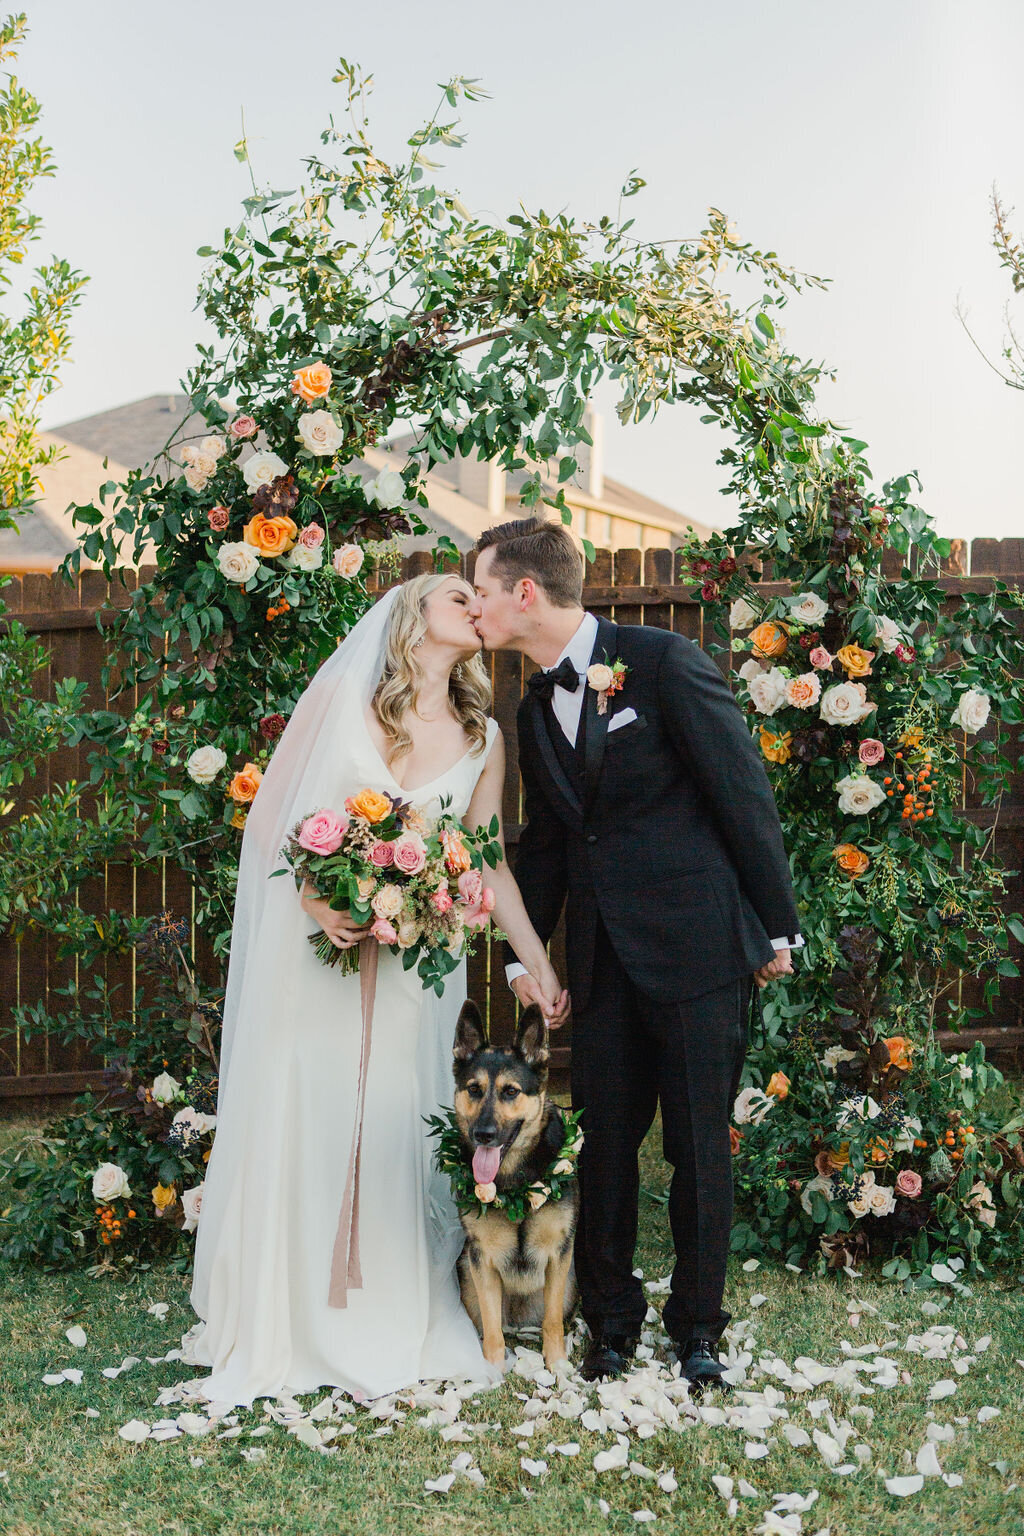 Wedding ceremony in Fort Worth with Floral Arch by Vella Nest Floral - Best Dallas Wedding Florist